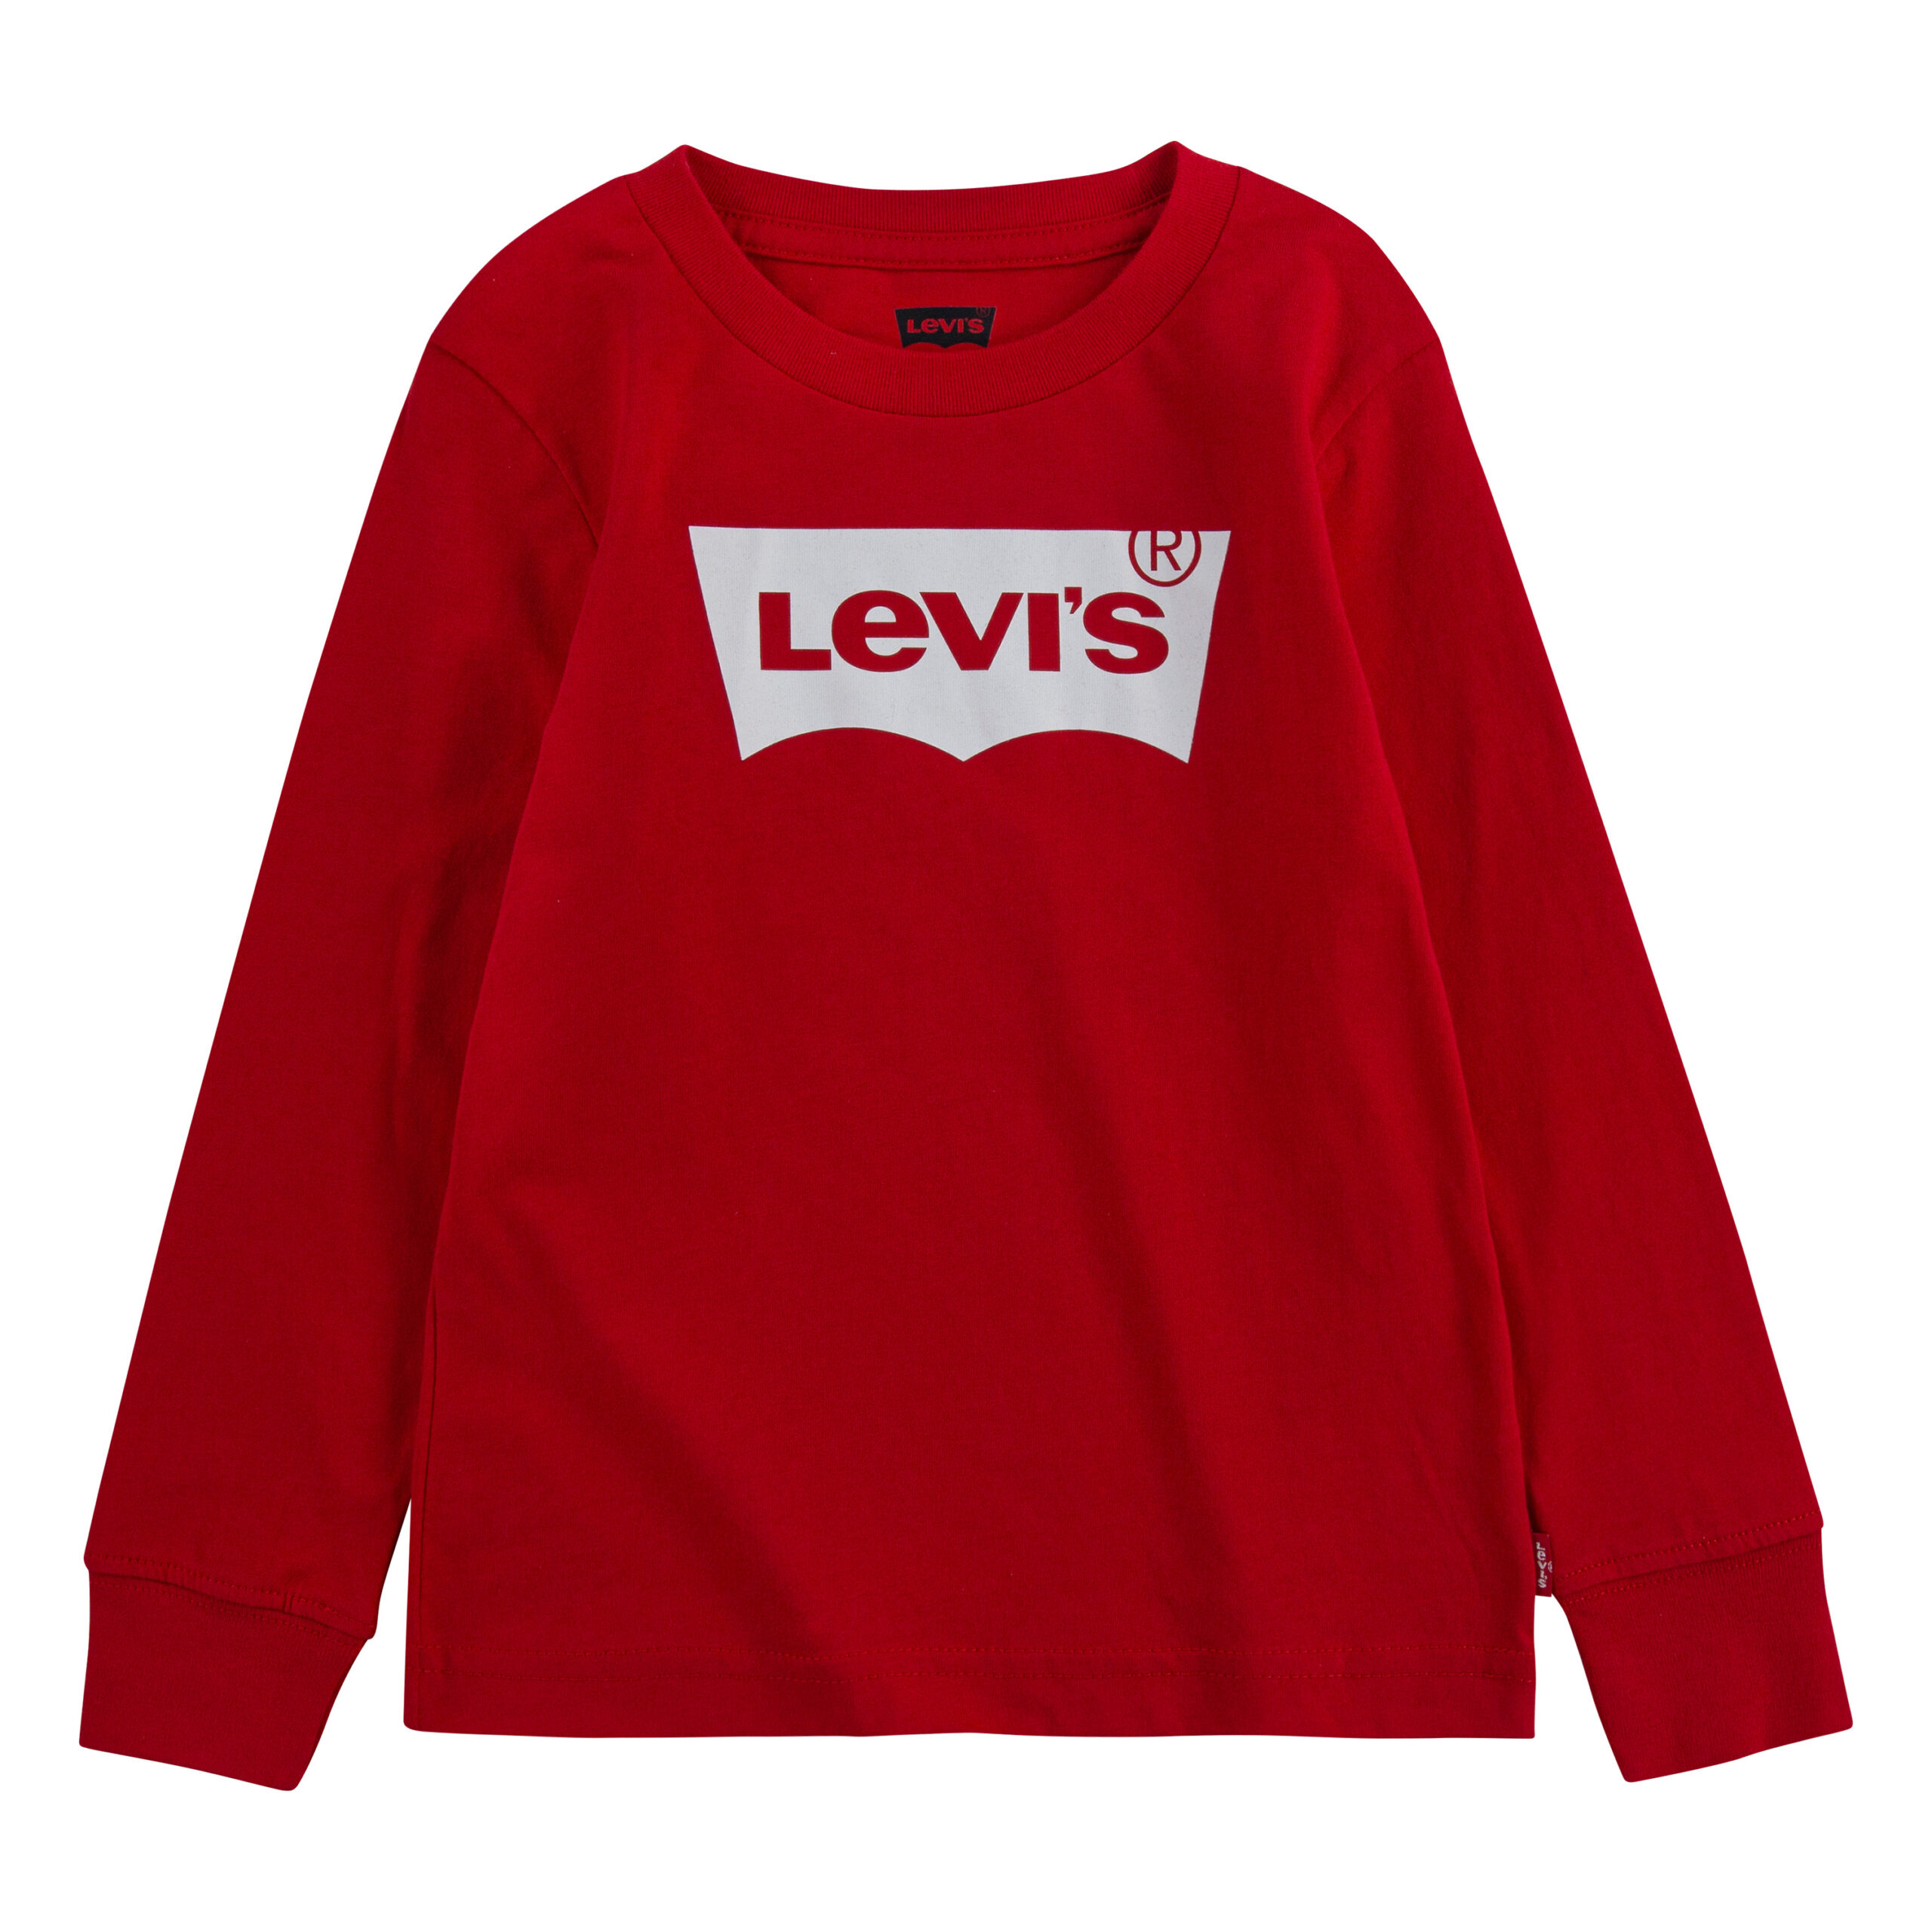 Levis Red Logo Long-Sleeved T-Shirt